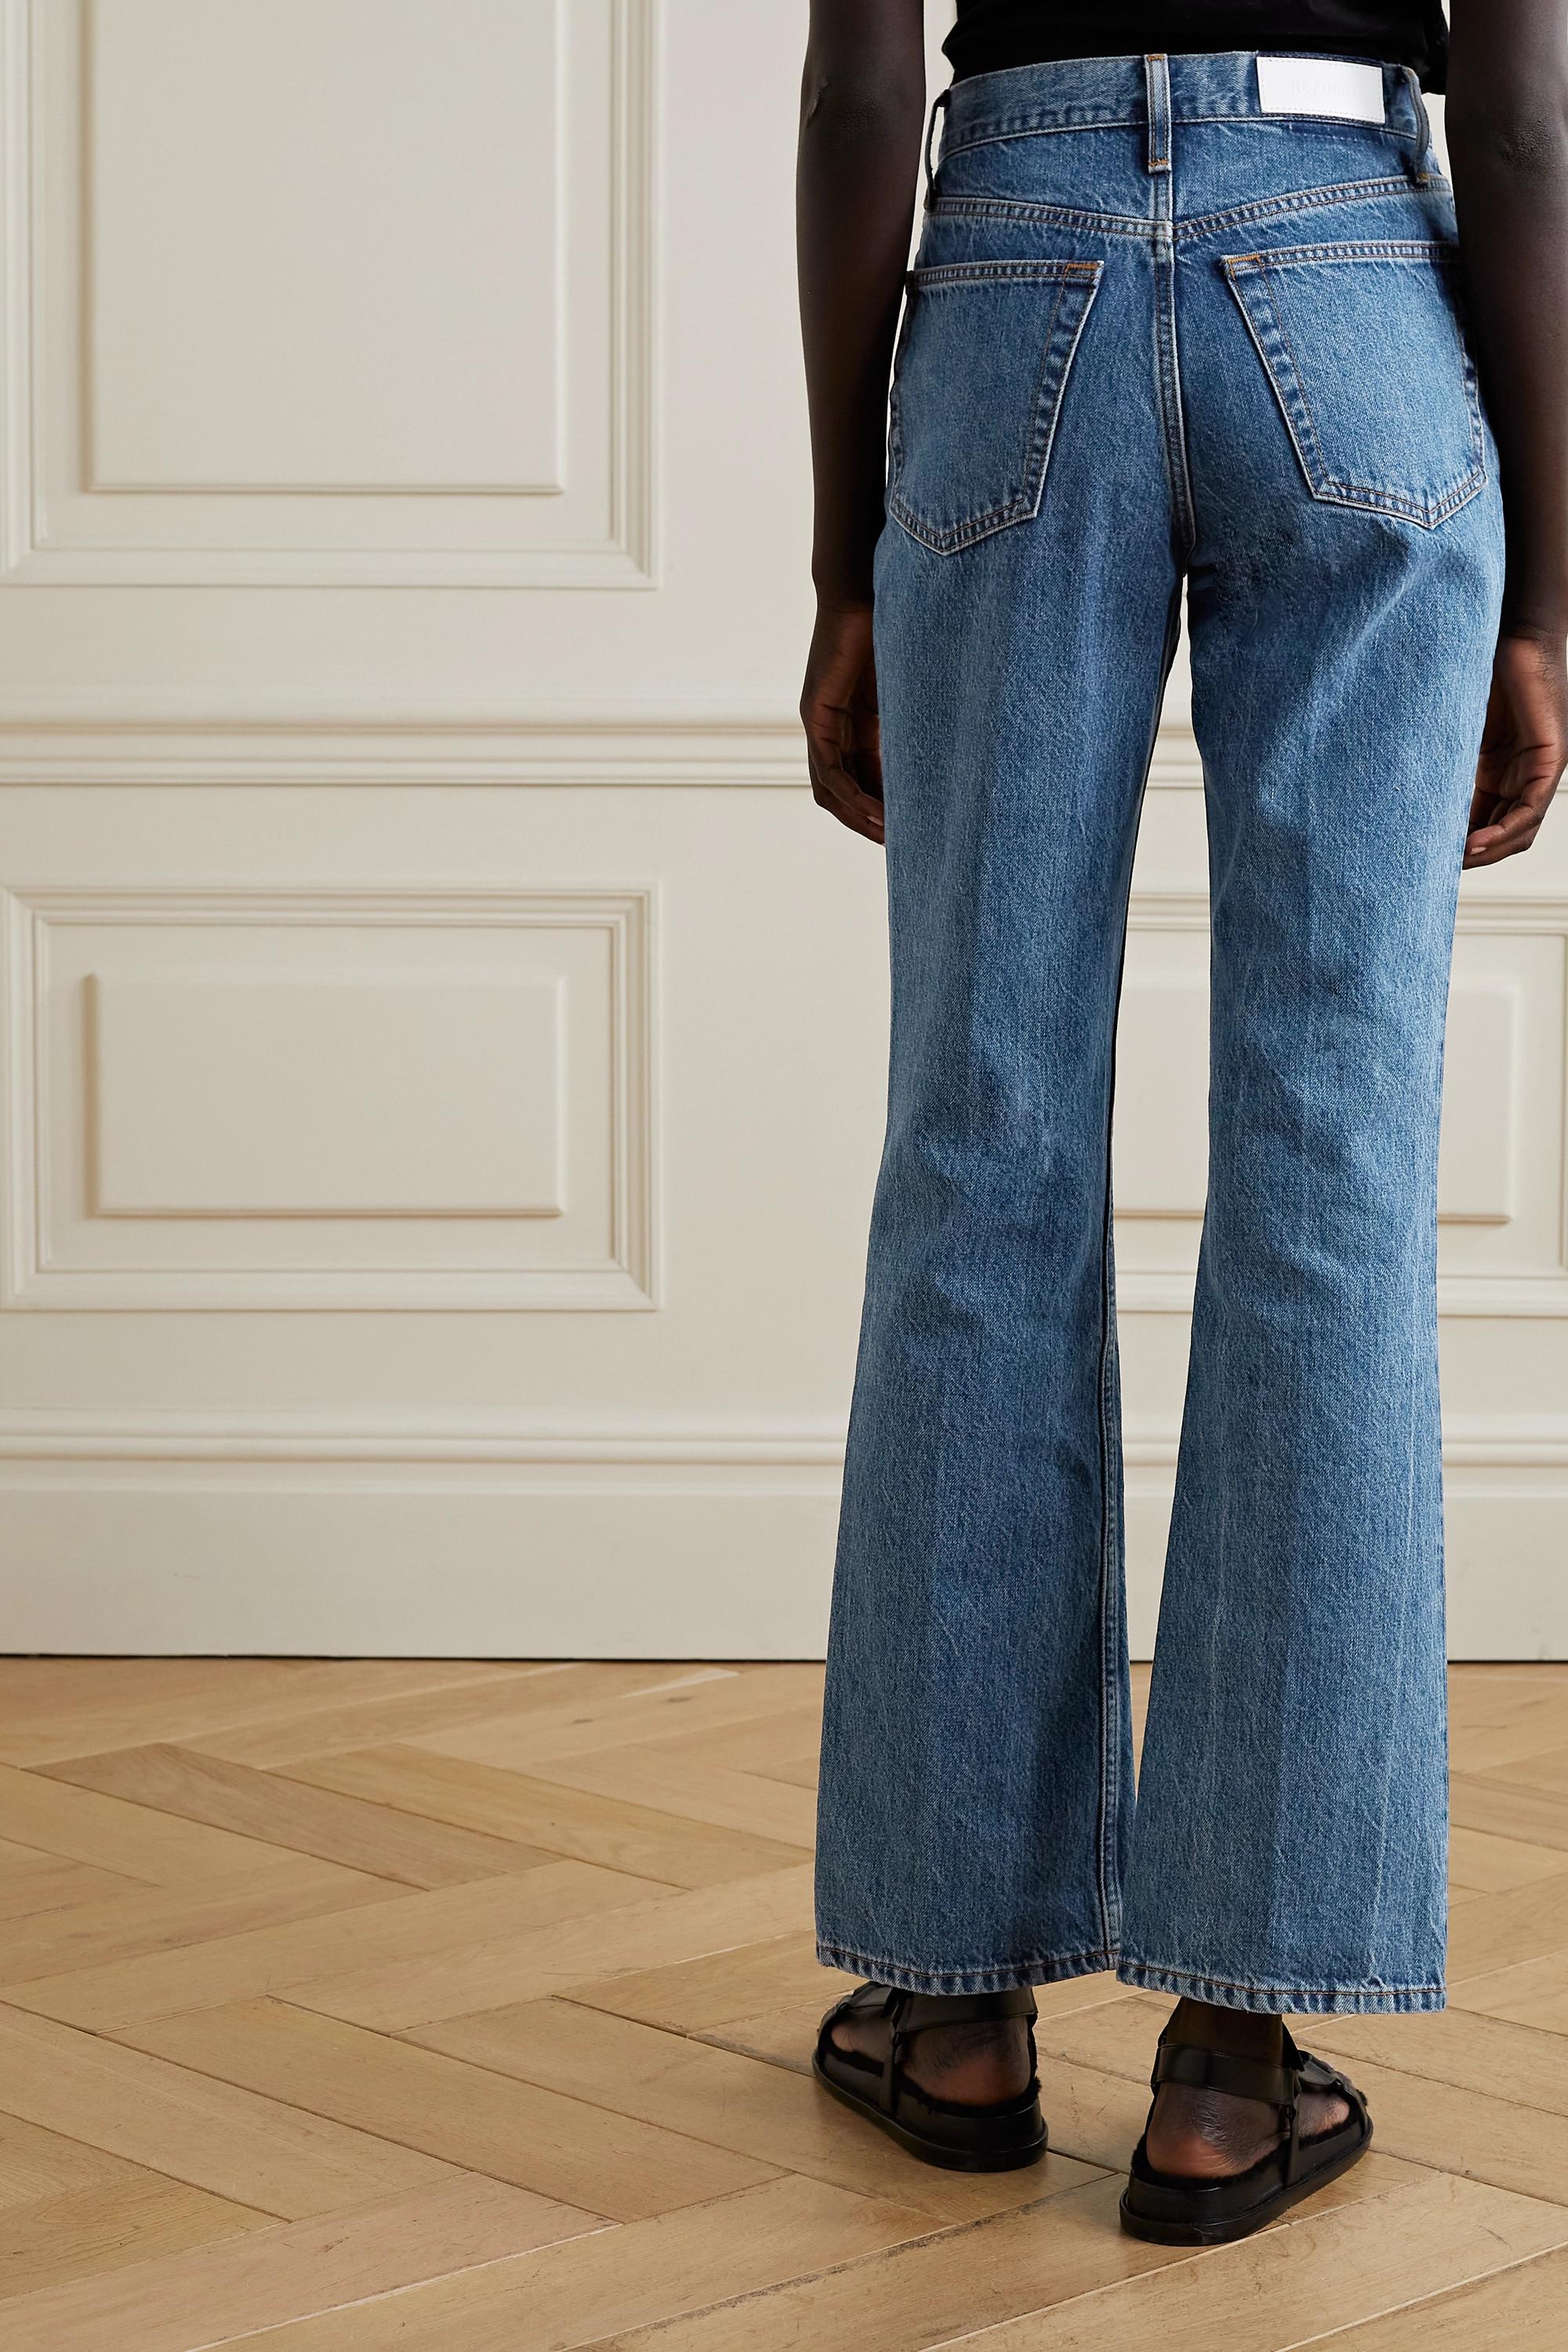 RE/DONE Net Sustain 70s High-rise Bootcut Jeans in Blue | Lyst